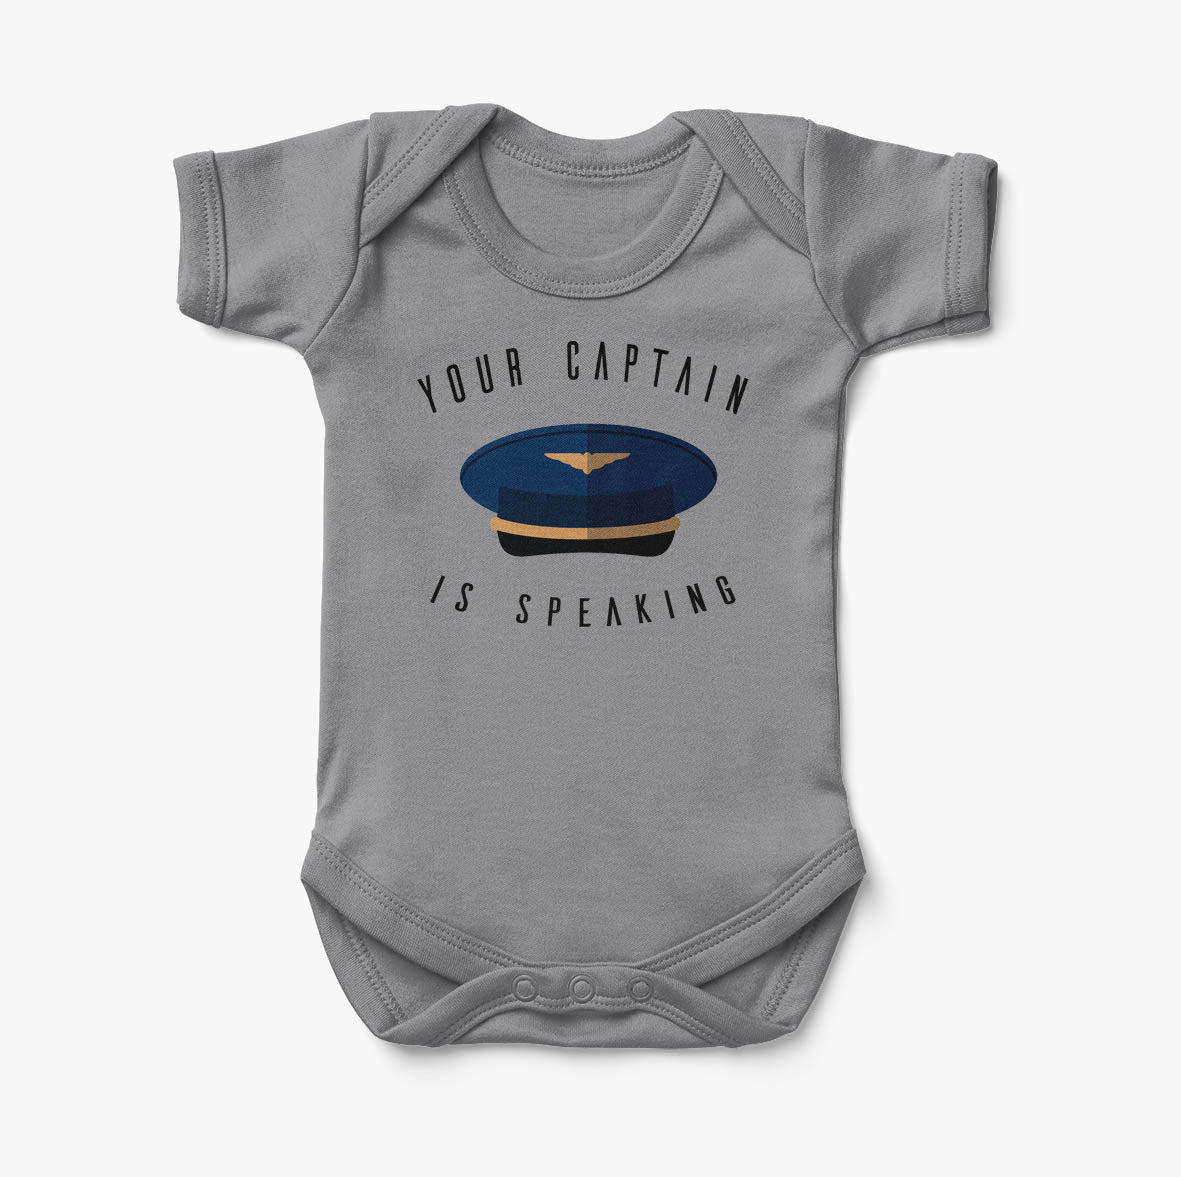 Your Captain Is Speaking Designed Baby Bodysuits